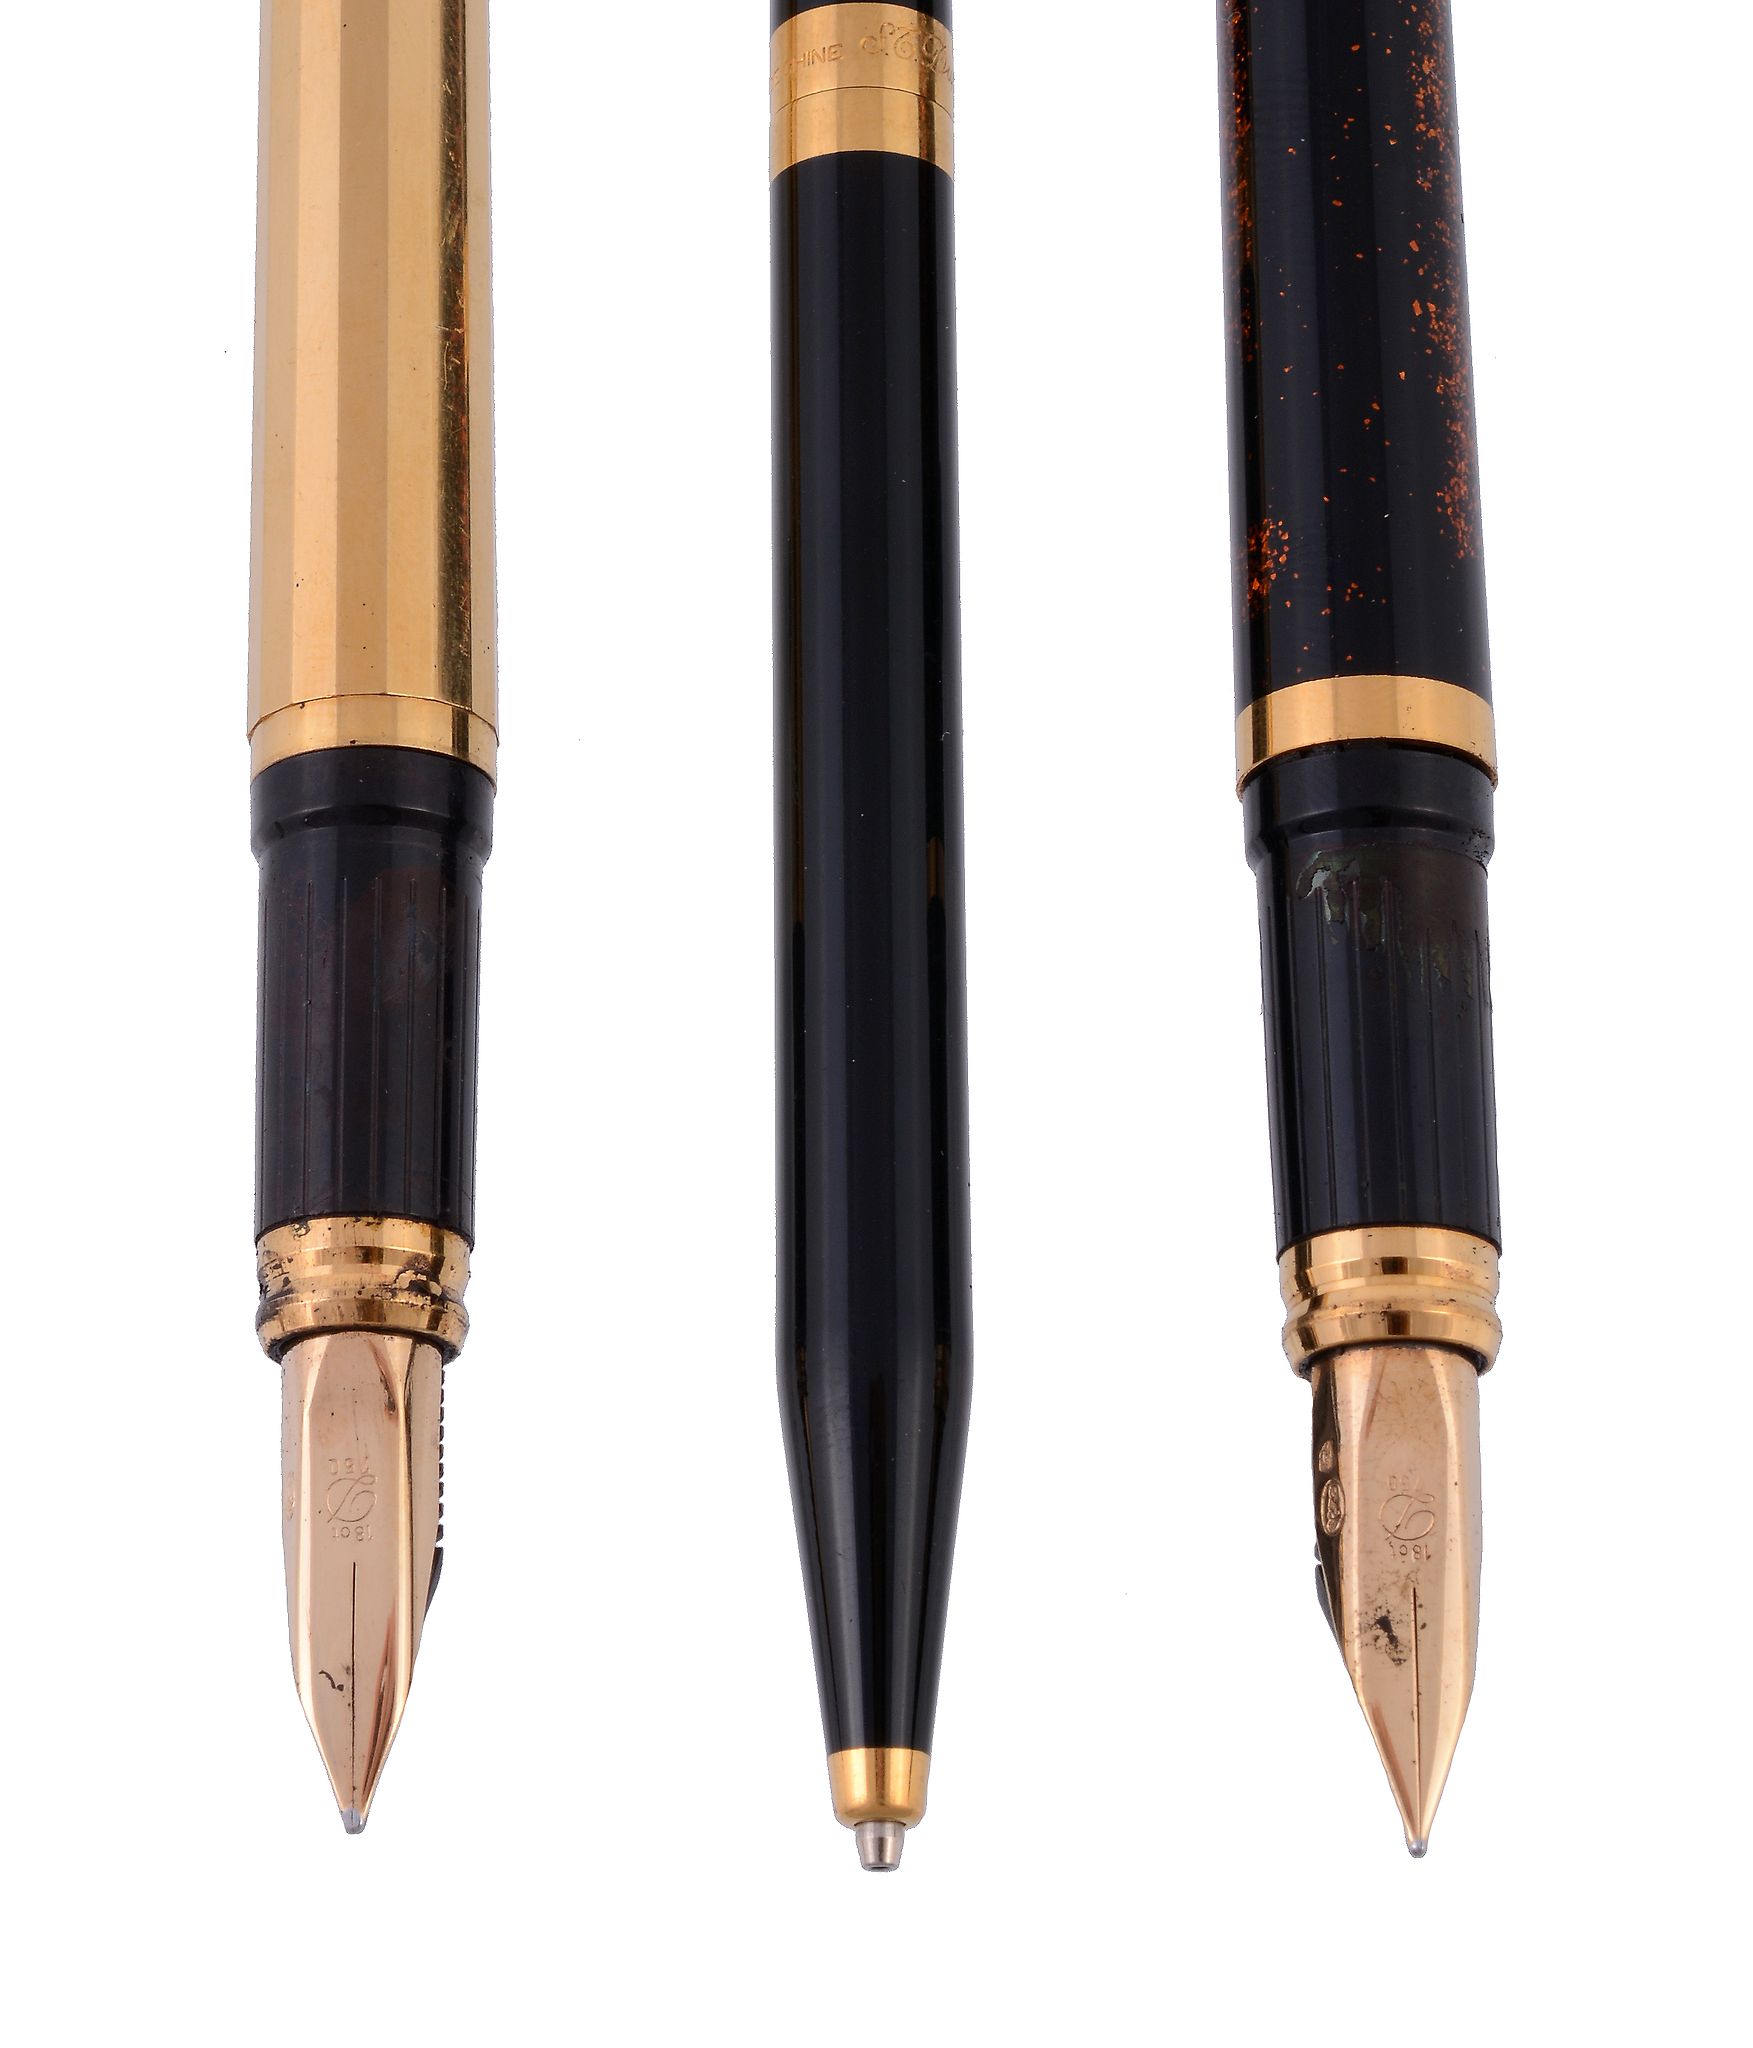 S. T. Dupont, Porte plume, a black fountain pen , with a gold dust finish  S. T. Dupont, Porte - Image 2 of 2